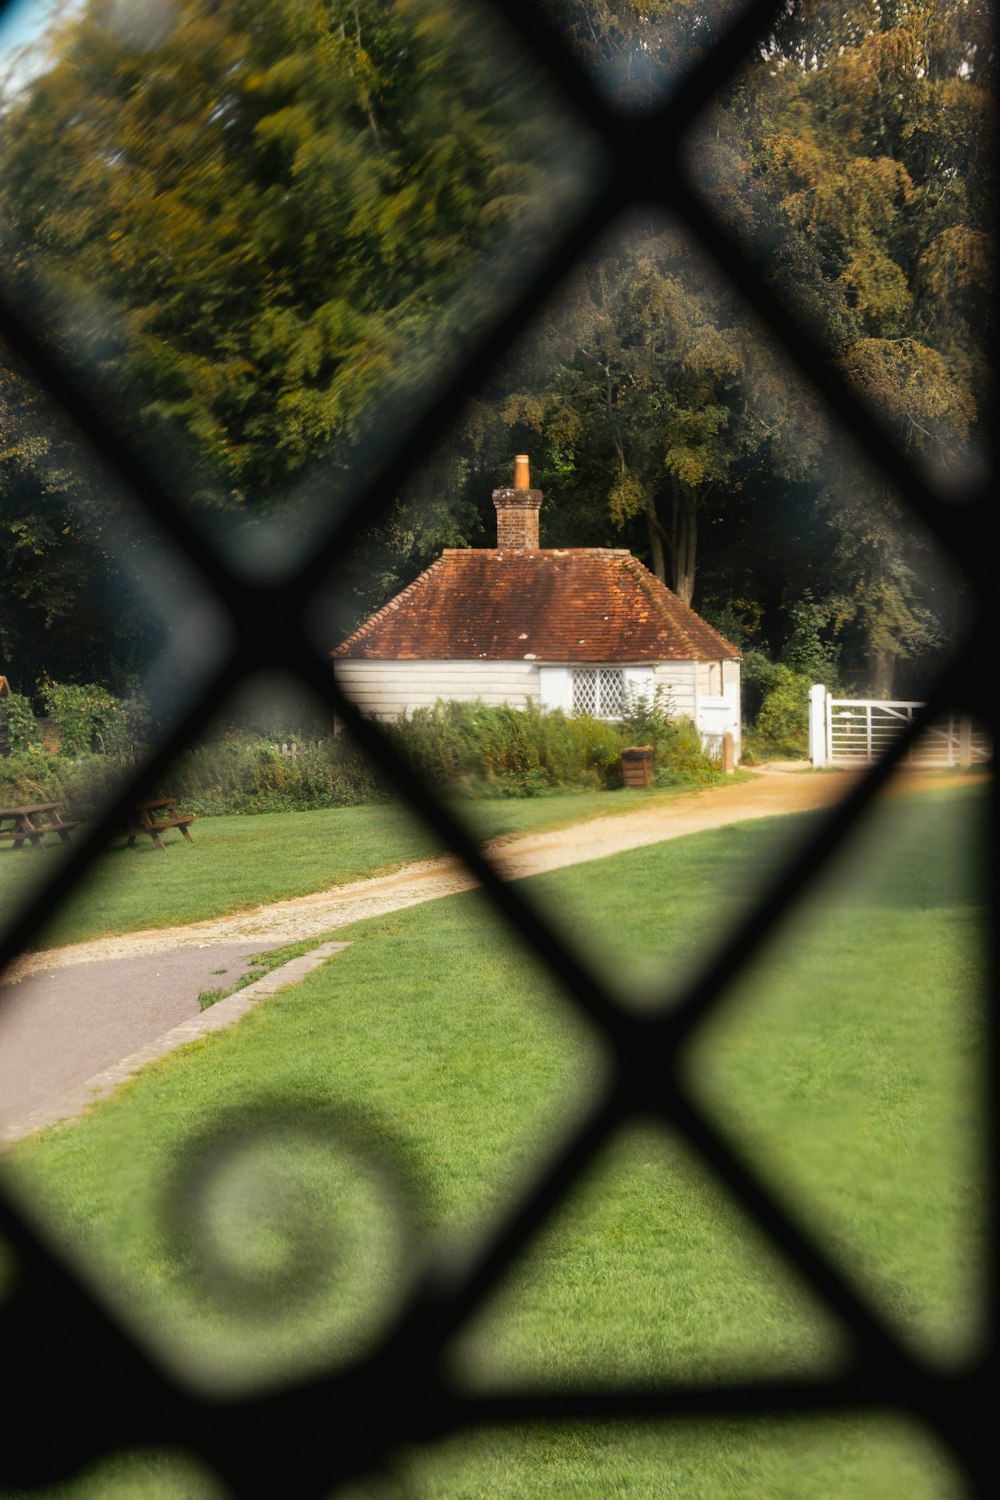 a view of a house through a fence